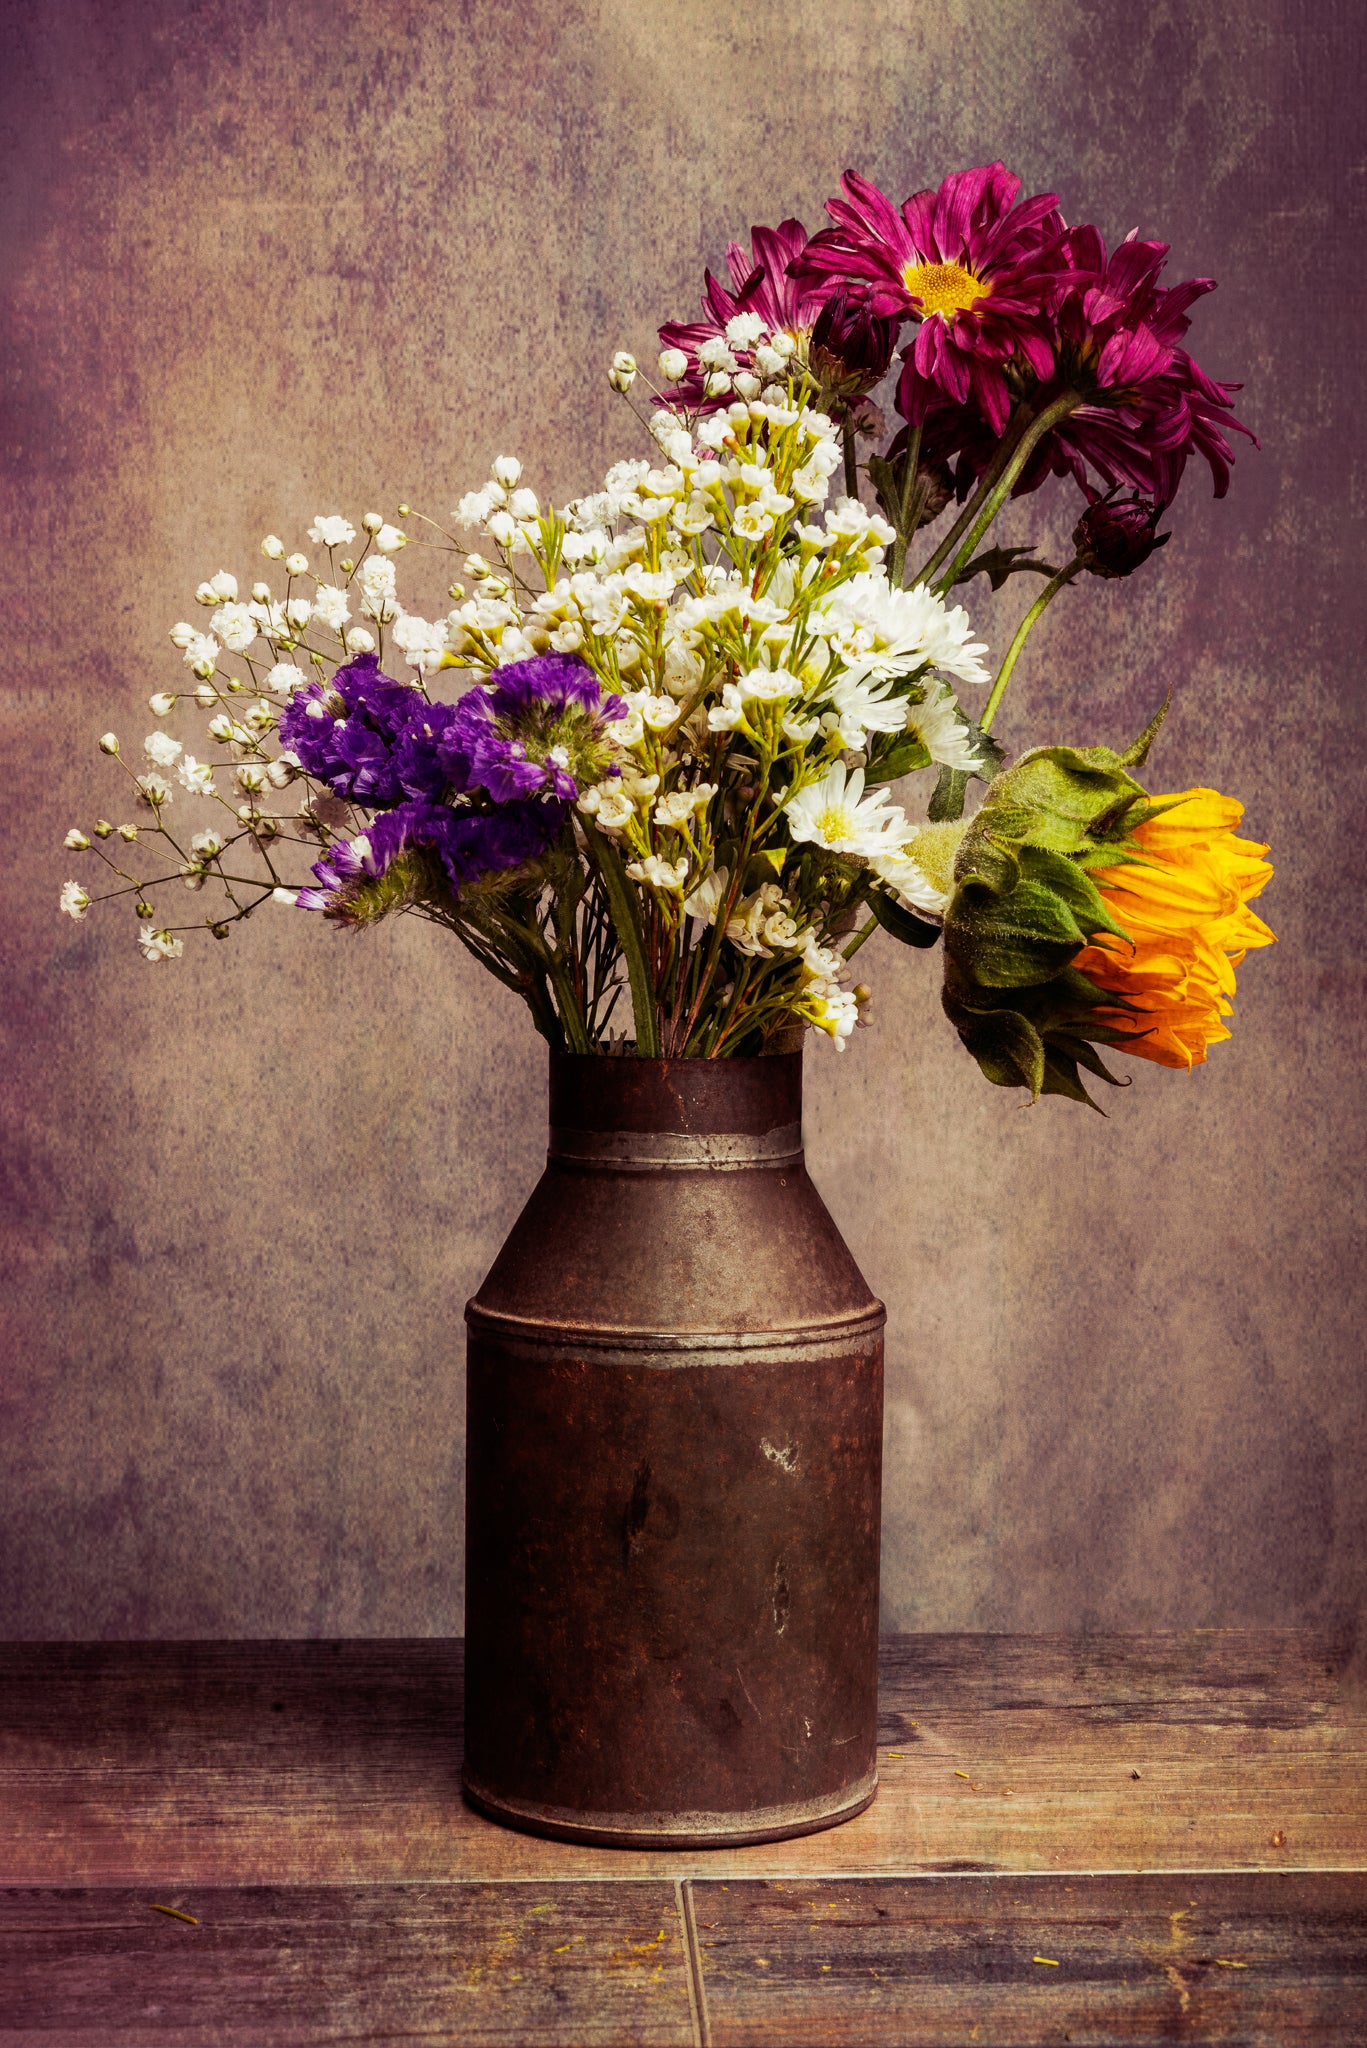 Fine art flower photograph of a bouquet of flowers in a tin can titled "Ol' Tin Can" by Cameron Dreaux of Dreaux Fine Art. 